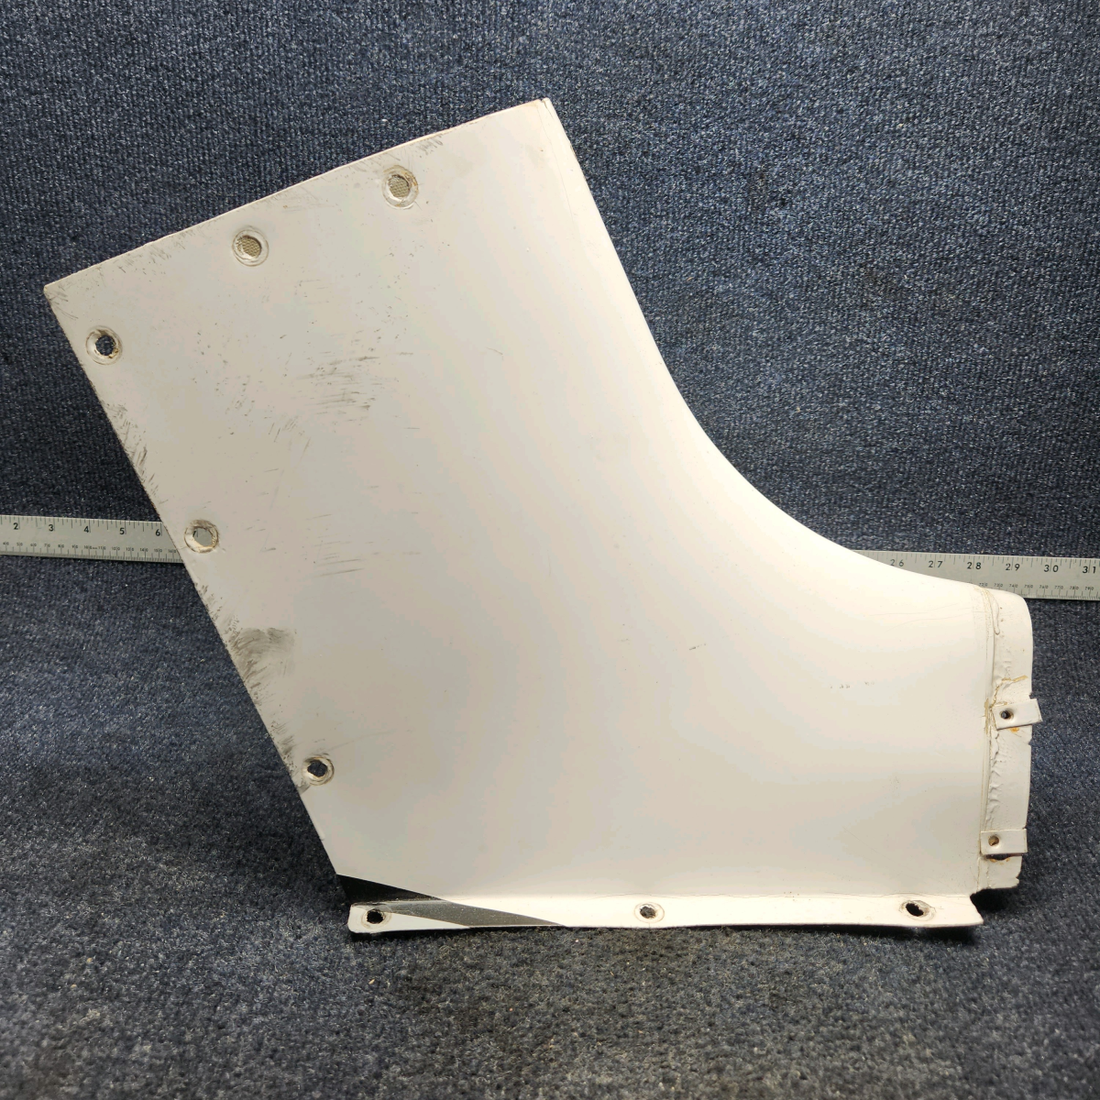 Used aircraft parts for sale, 78913-003 Piper PA32RT-300 AFT DORSAL FIN SADDLE